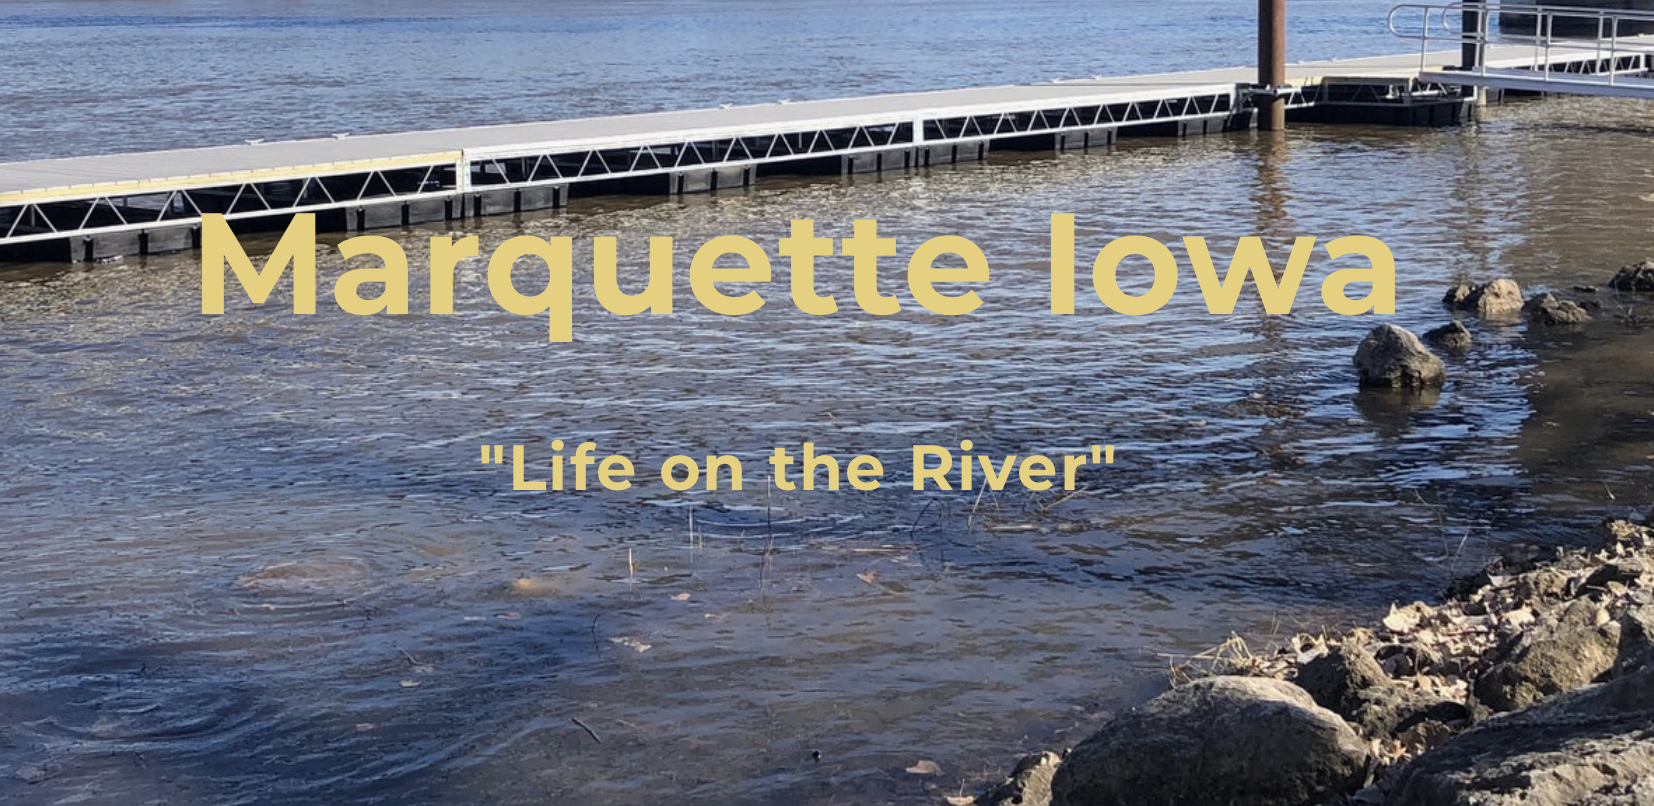 image of river with the words "Marquette, Iowa, Life on the River" on top of image.